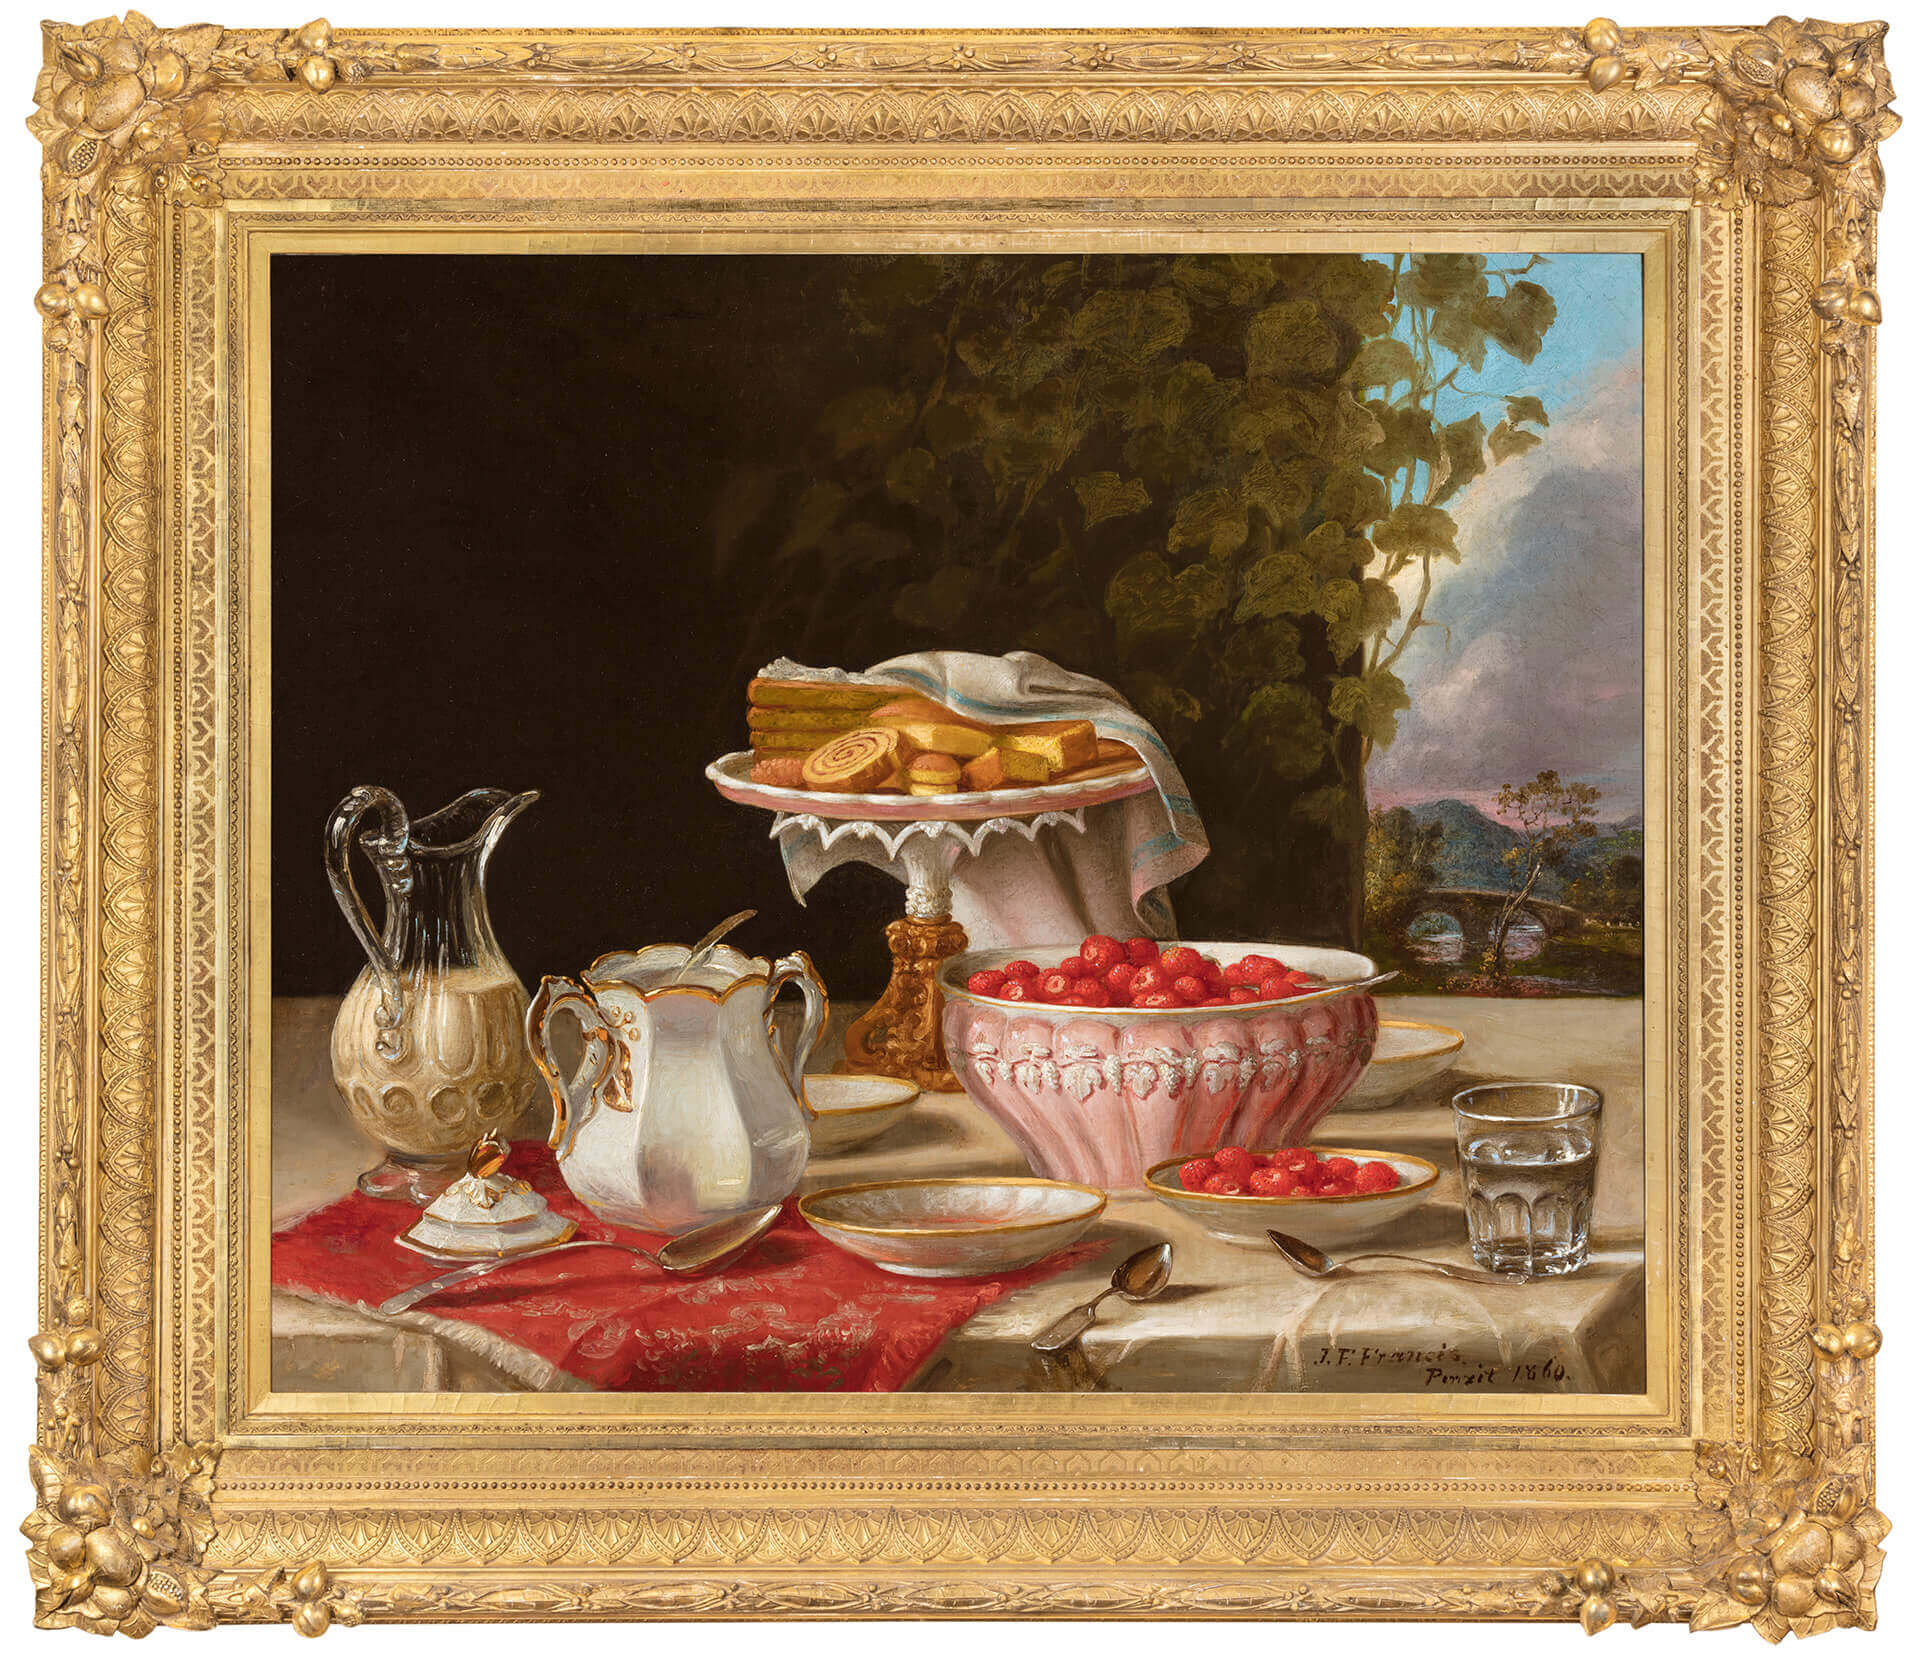 Strawberries and Cakes, 1860